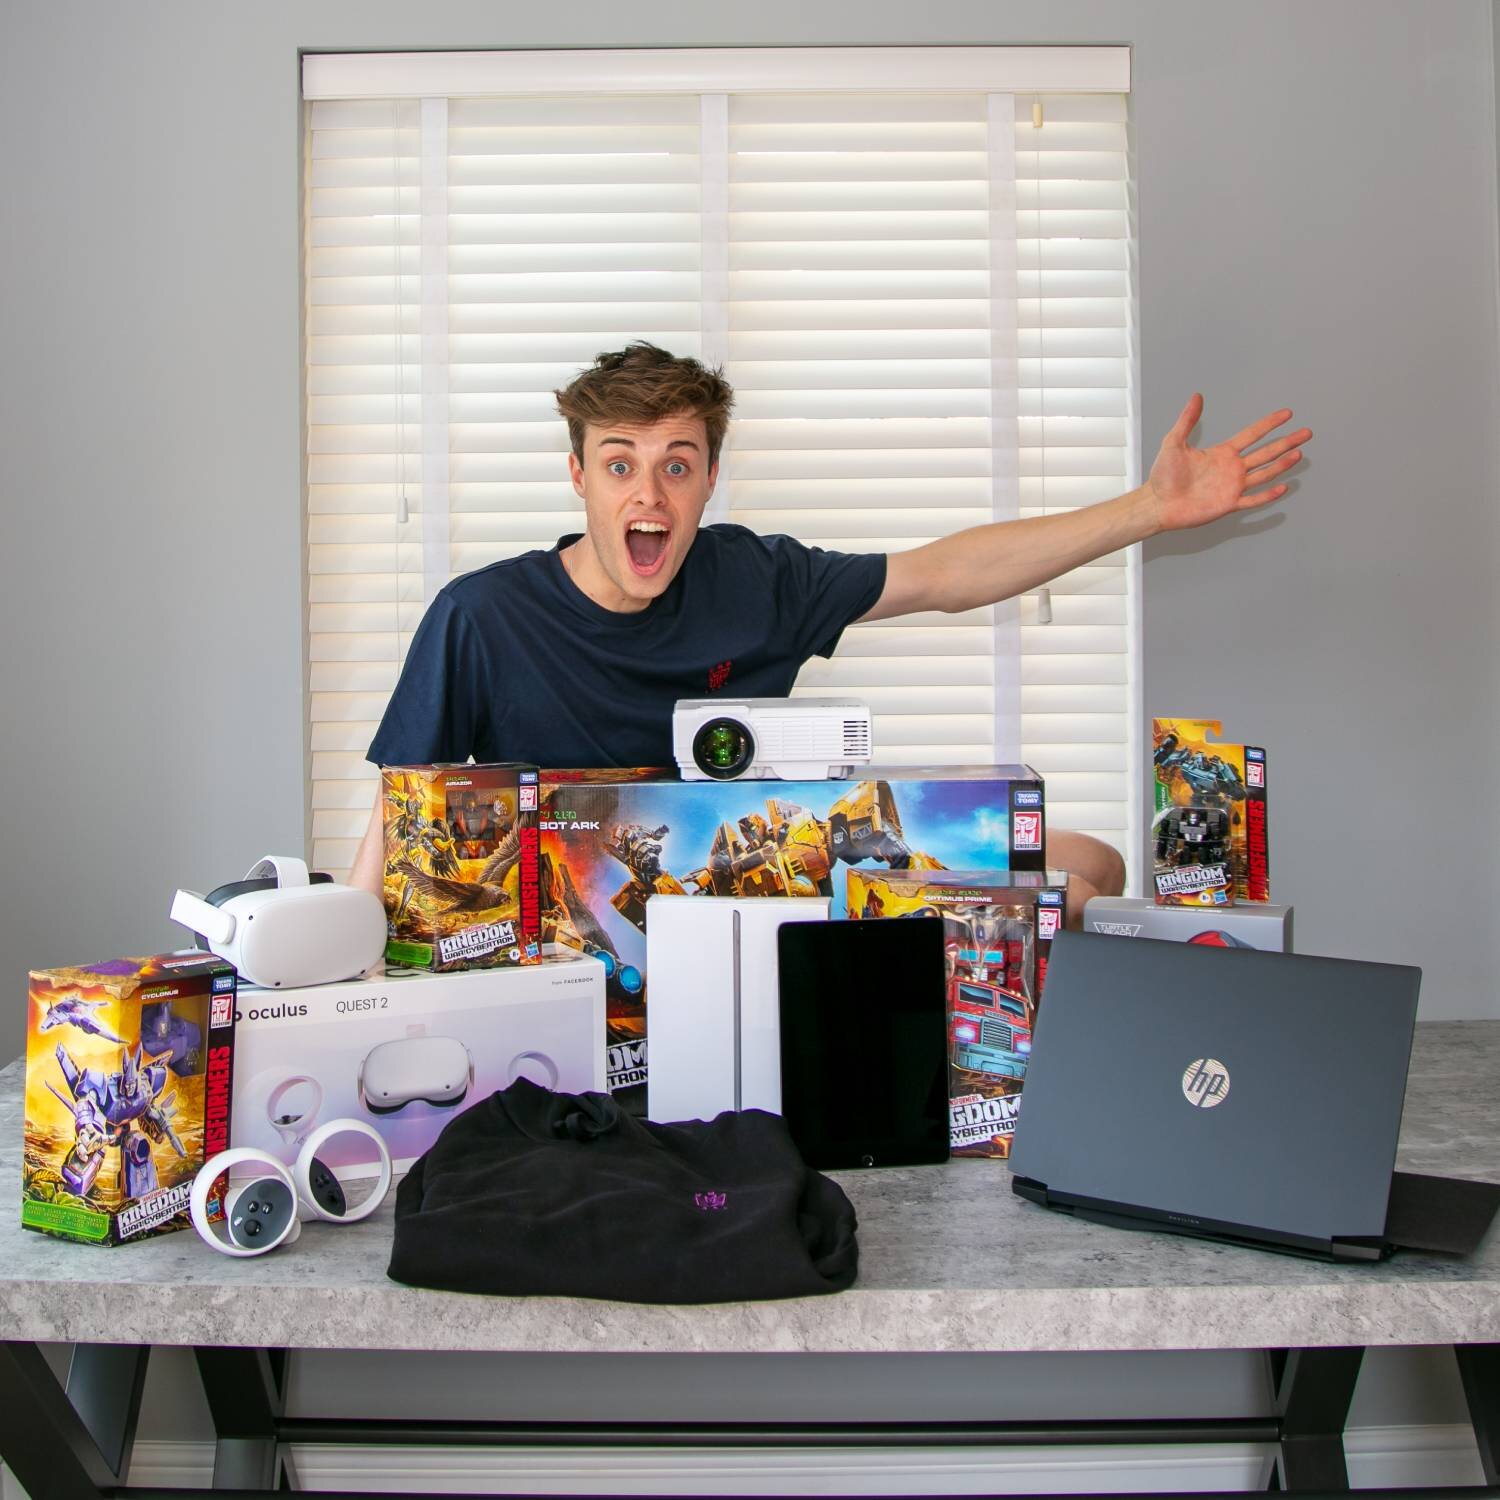 Joe and Huge Netflix/Transformers Birthday Party Giveaway Collab SHARPER